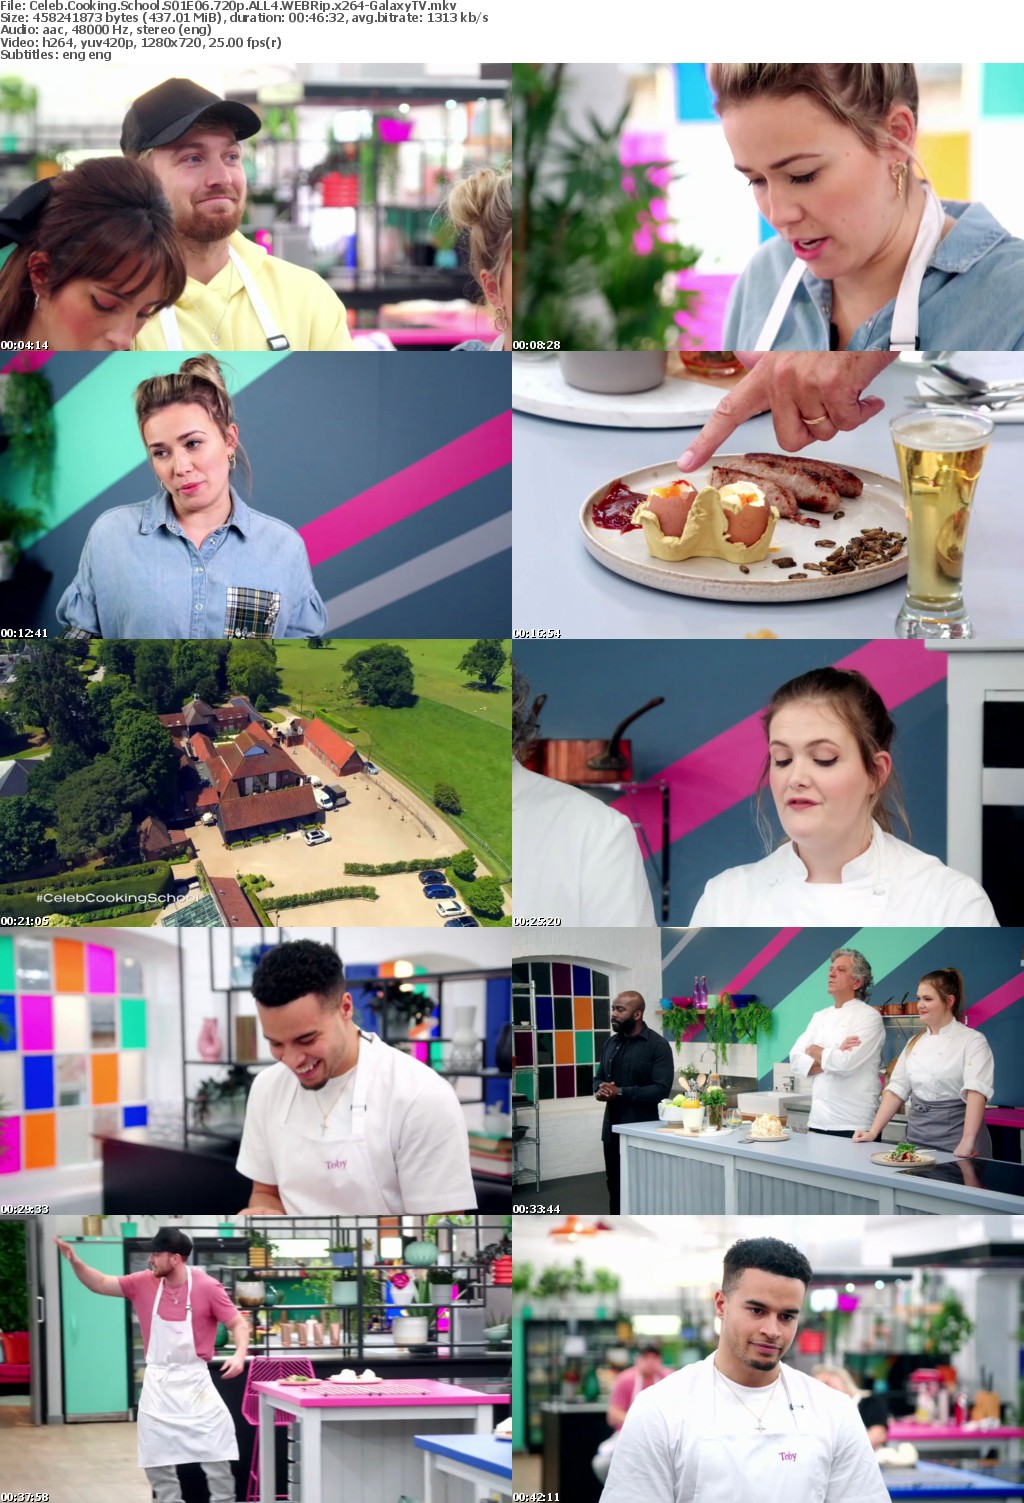 Celeb Cooking School S01 COMPLETE 720p ALL4 WEBRip x264-GalaxyTV